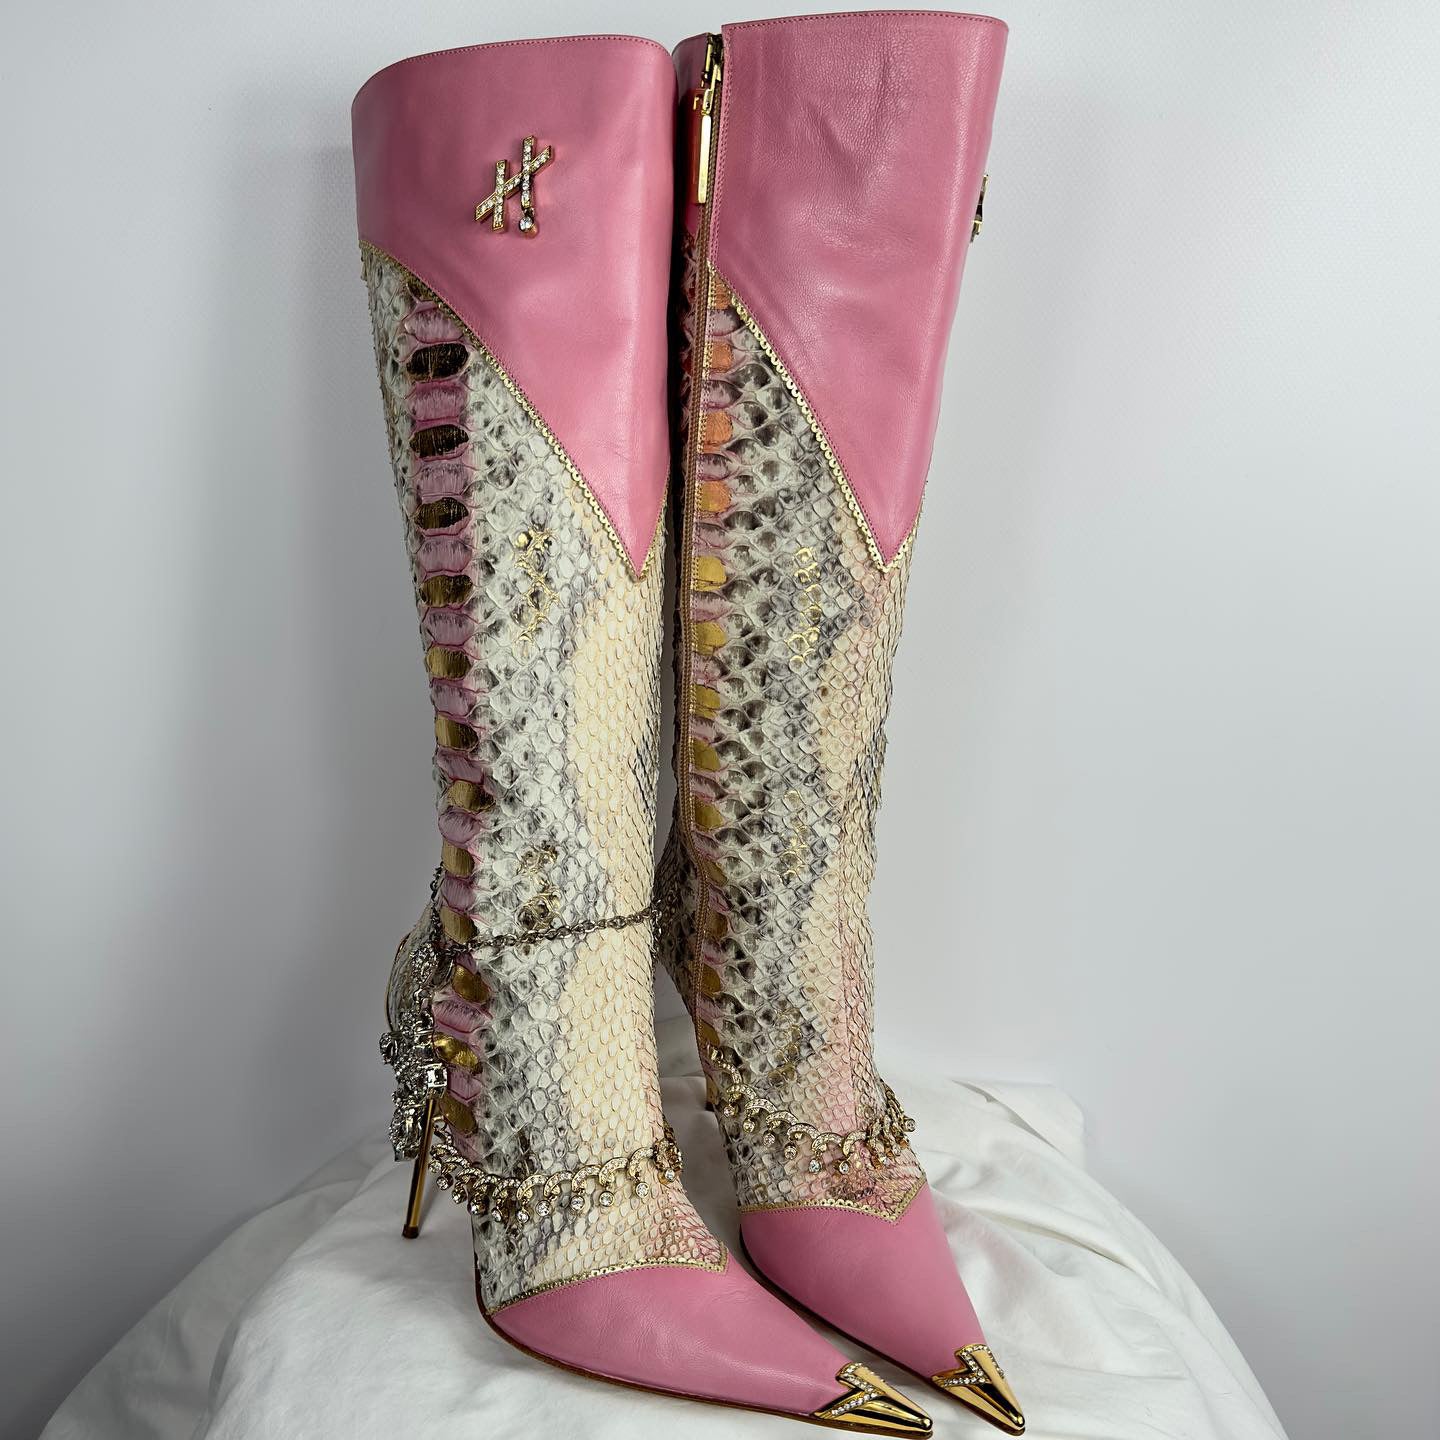 Hamlet Couture Italian Python Boots new with box